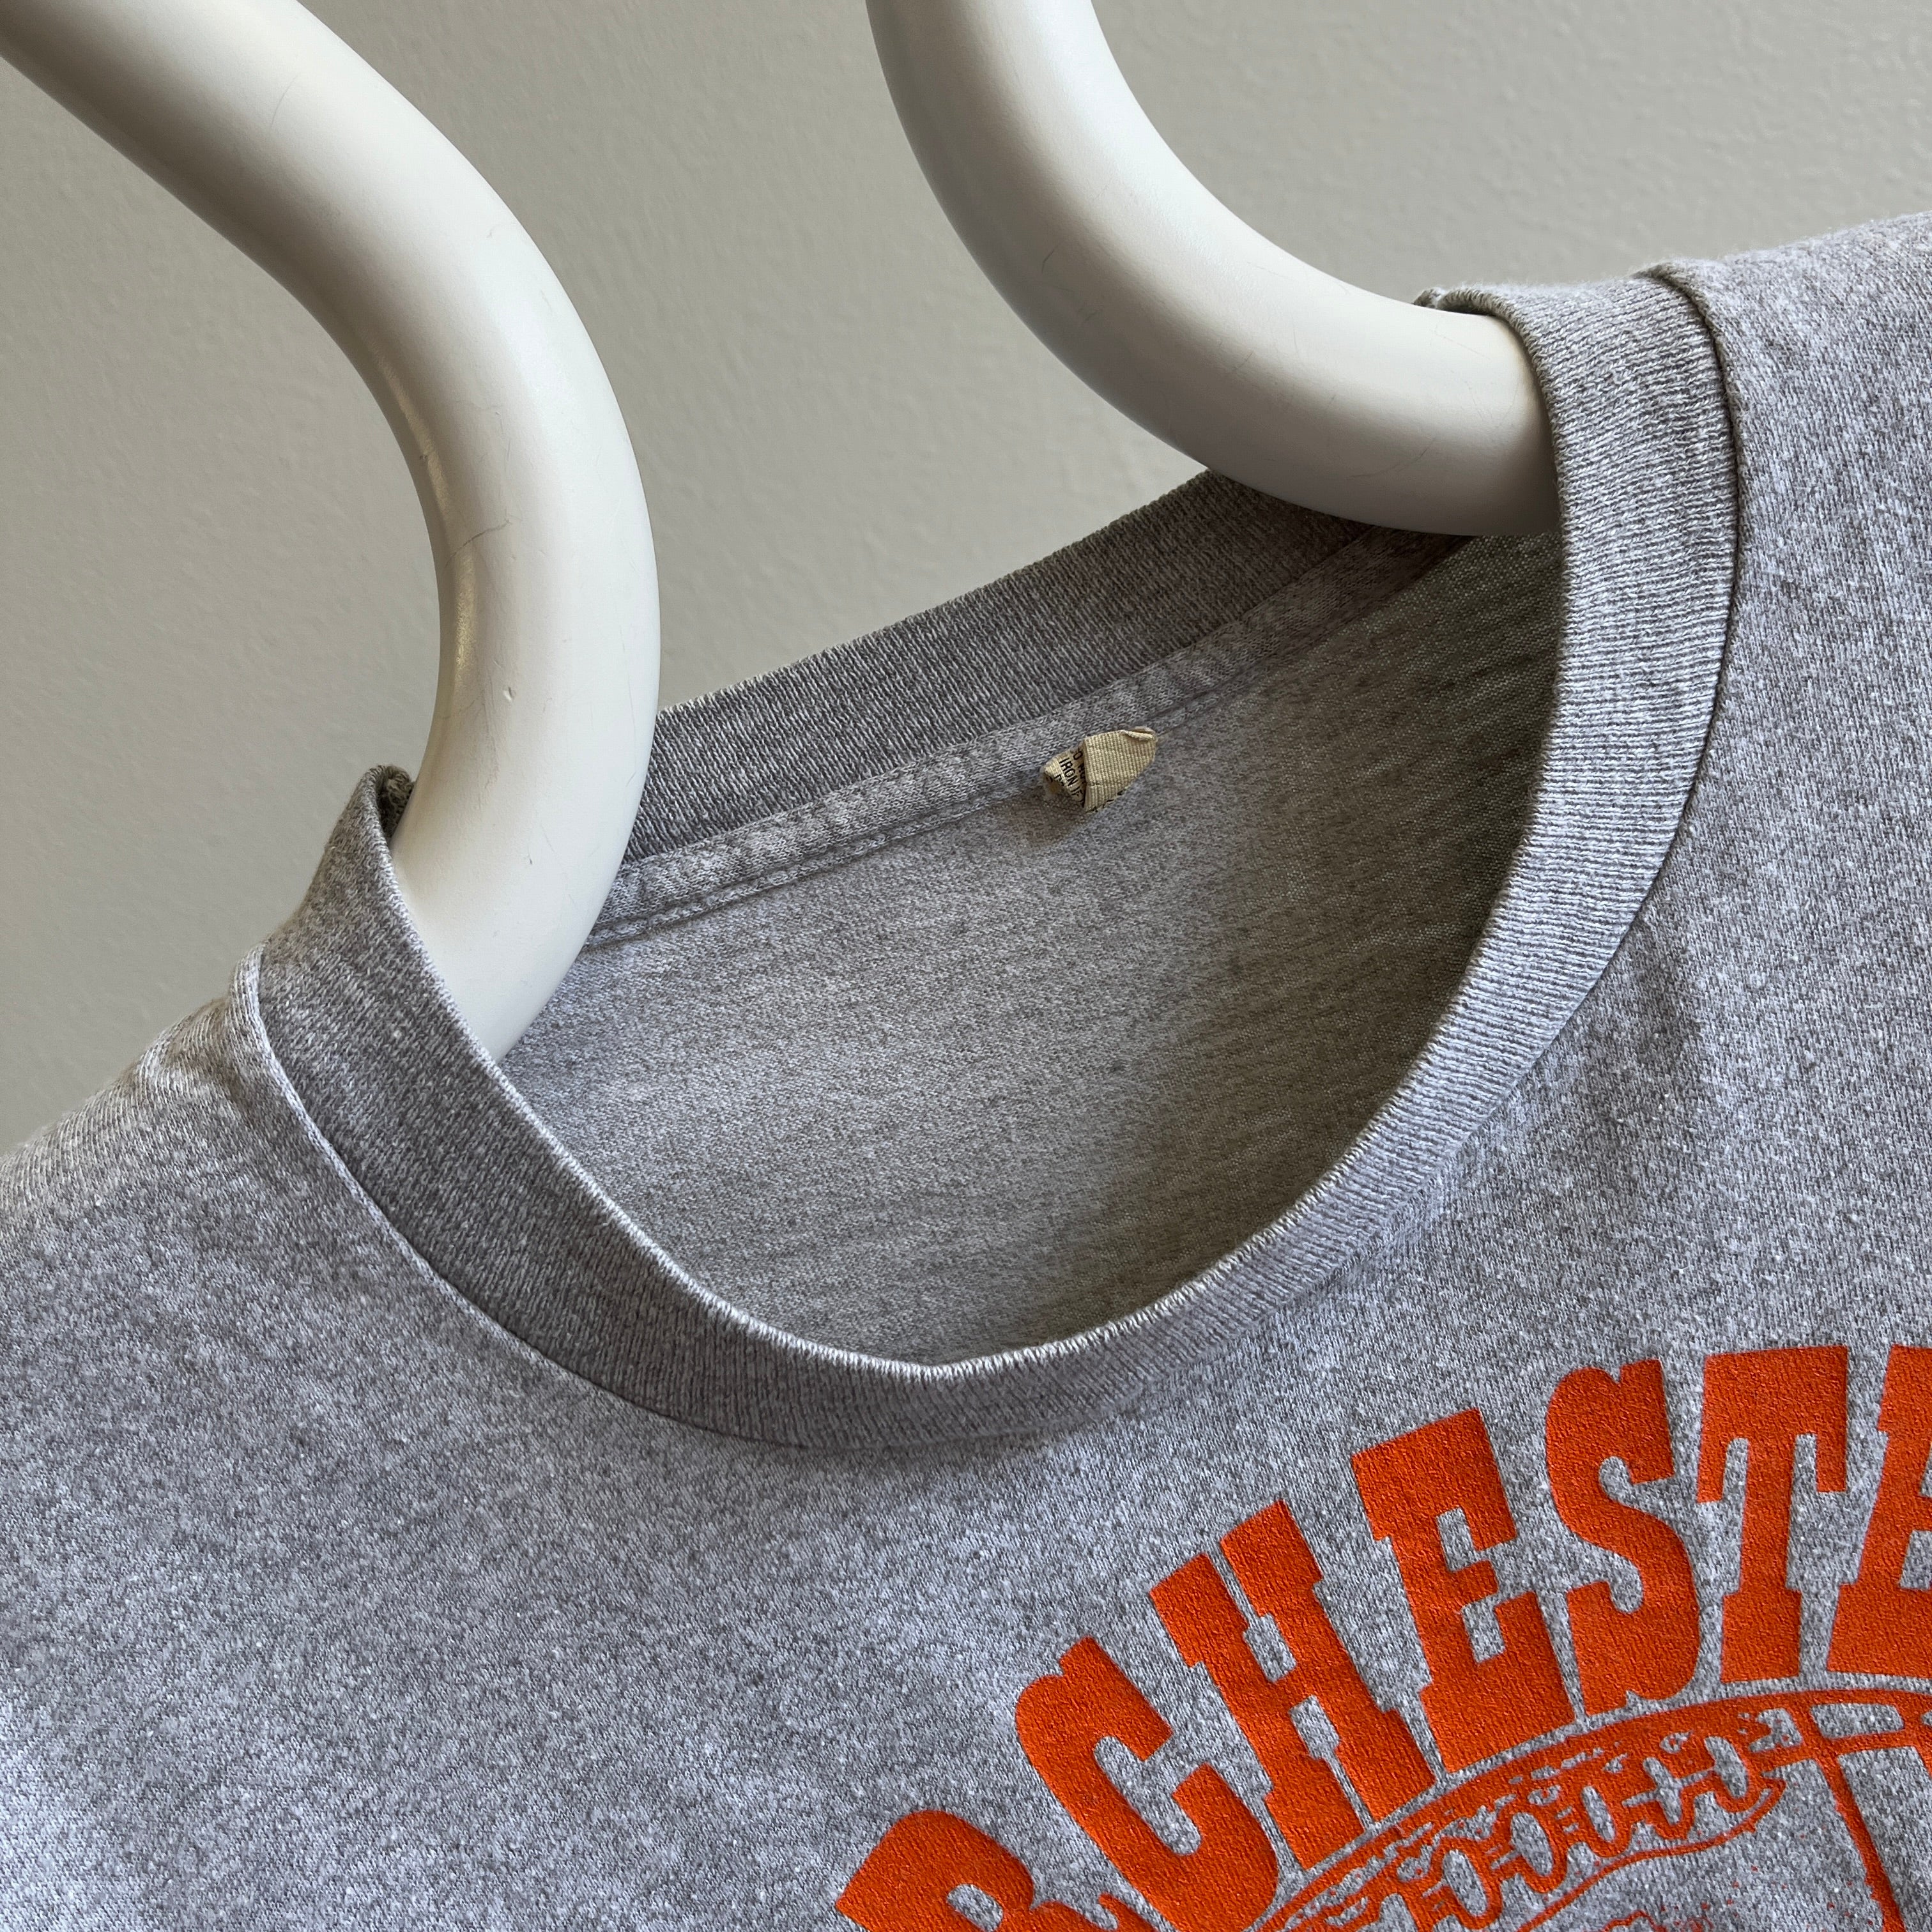 1980s Dorchester Football Crop Top by Screen Stars